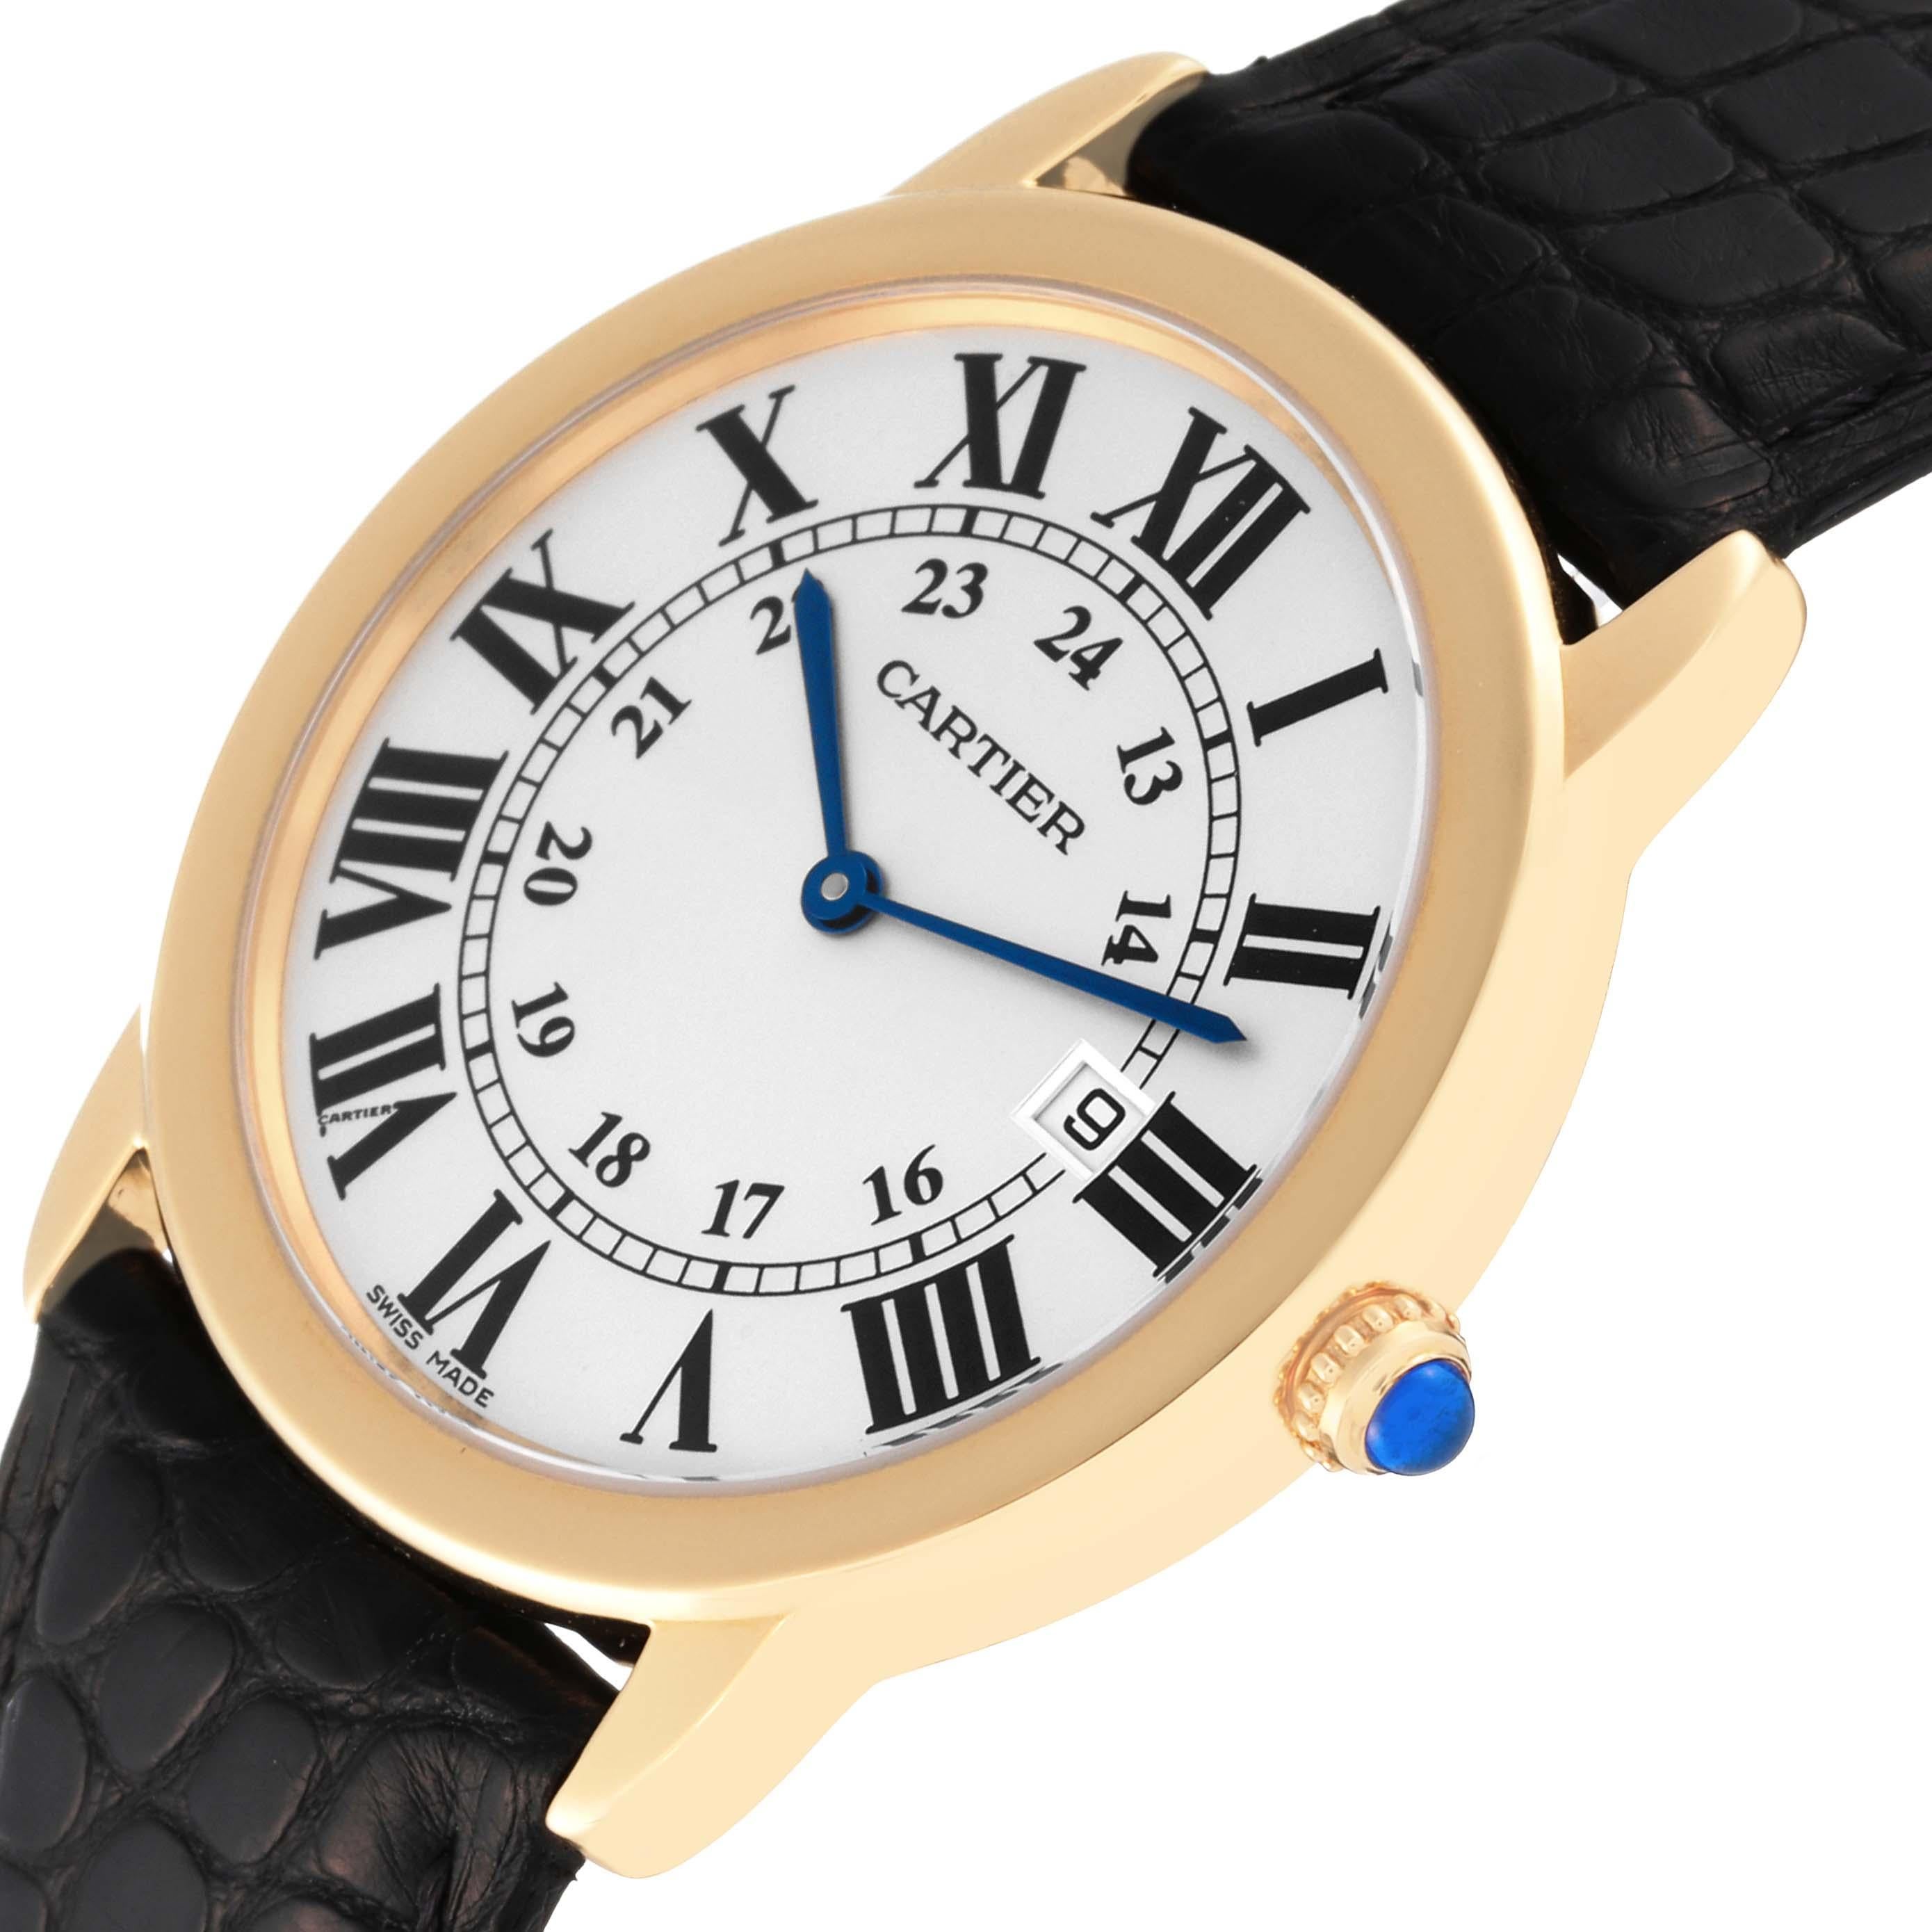 Cartier Ronde Solo 36mm Large Yellow Gold Steel Mens Watch W6700455. Quartz movement. 18K yellow gold and stainless steel case 36.0 mm in diameter. Circular grained crown set with a blue spinel cabochon. . Scratch resistant sapphire crystal.